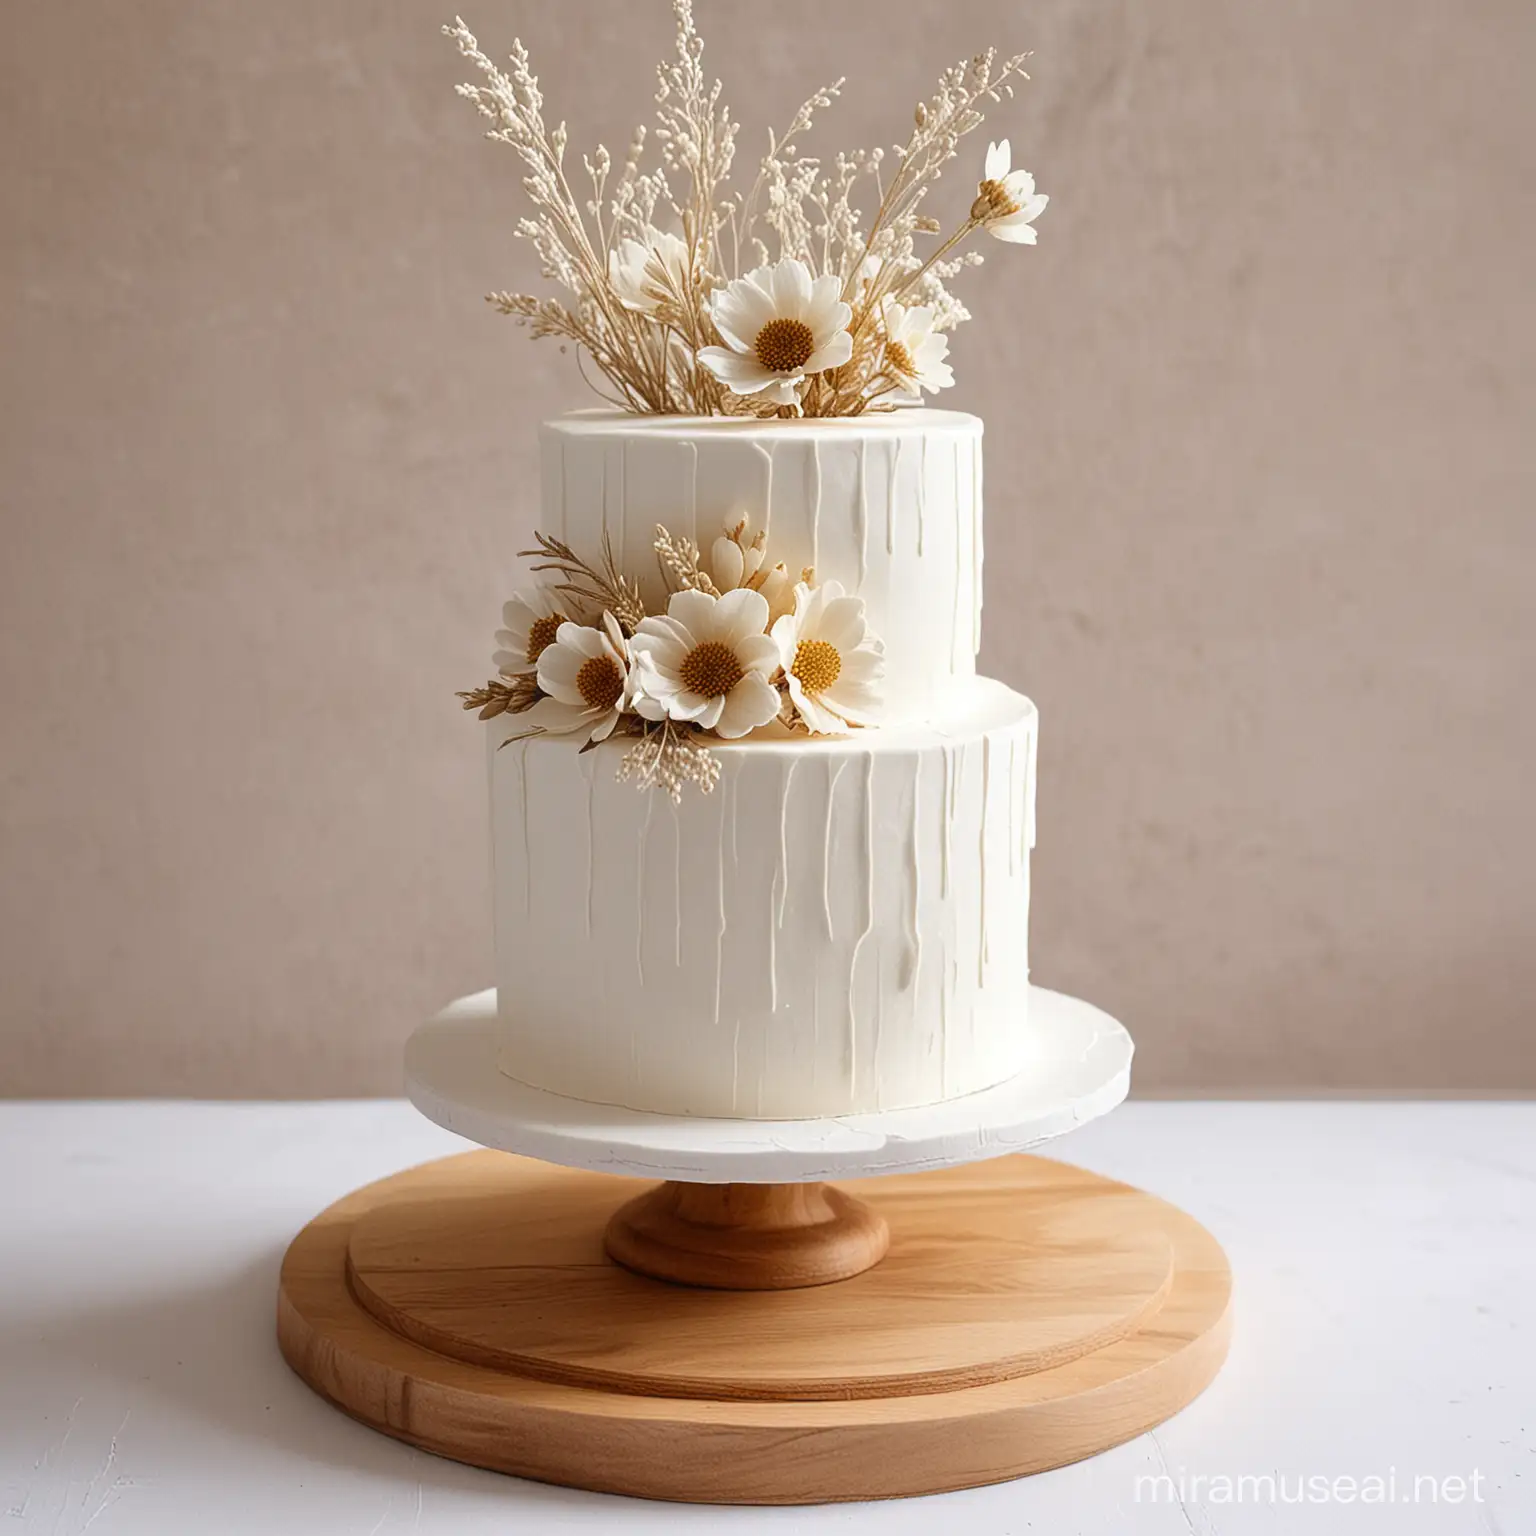 Elegant TwoTiered White Cake with Minimalist Design and Dried Flower Decoration